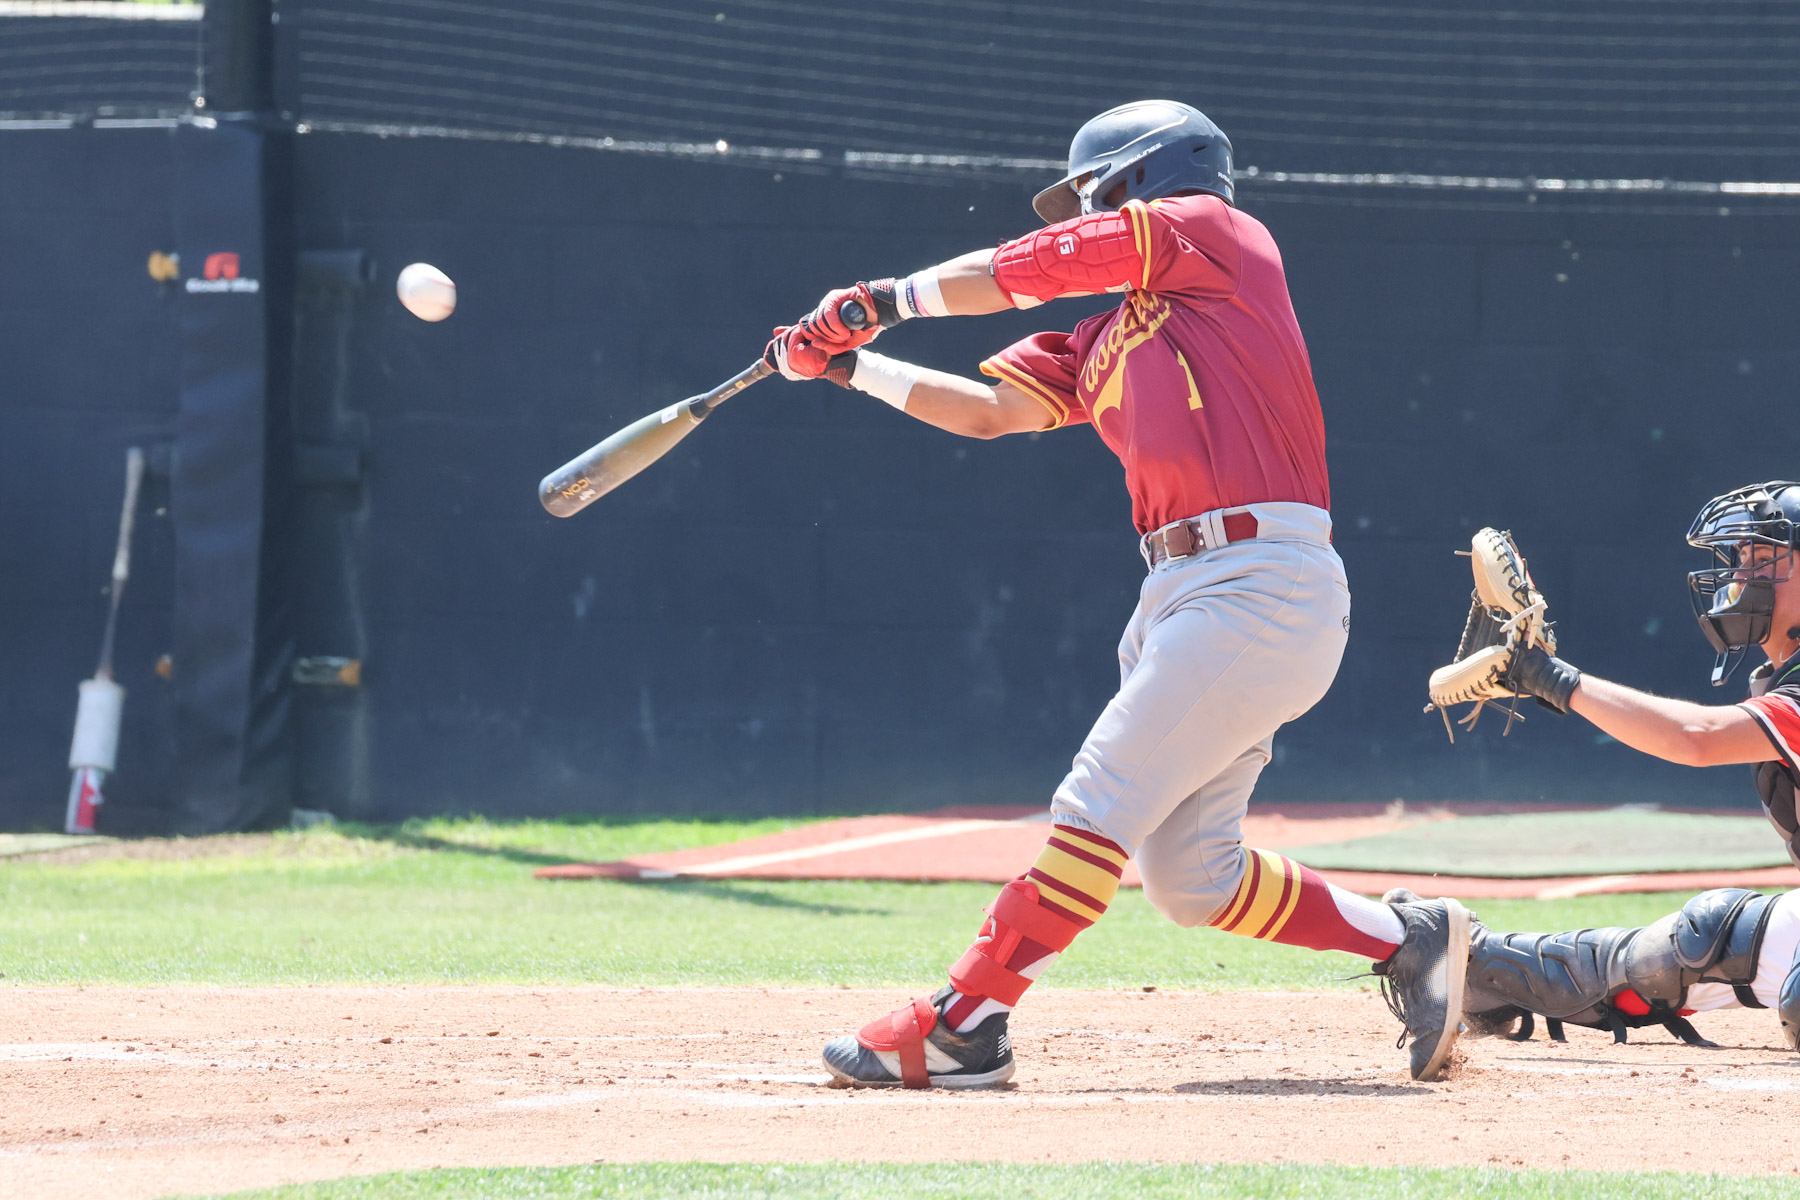 Ivan Barragan lines a hit during the team's 24-run explosion at Chaffey (photo by Richard Quinton).